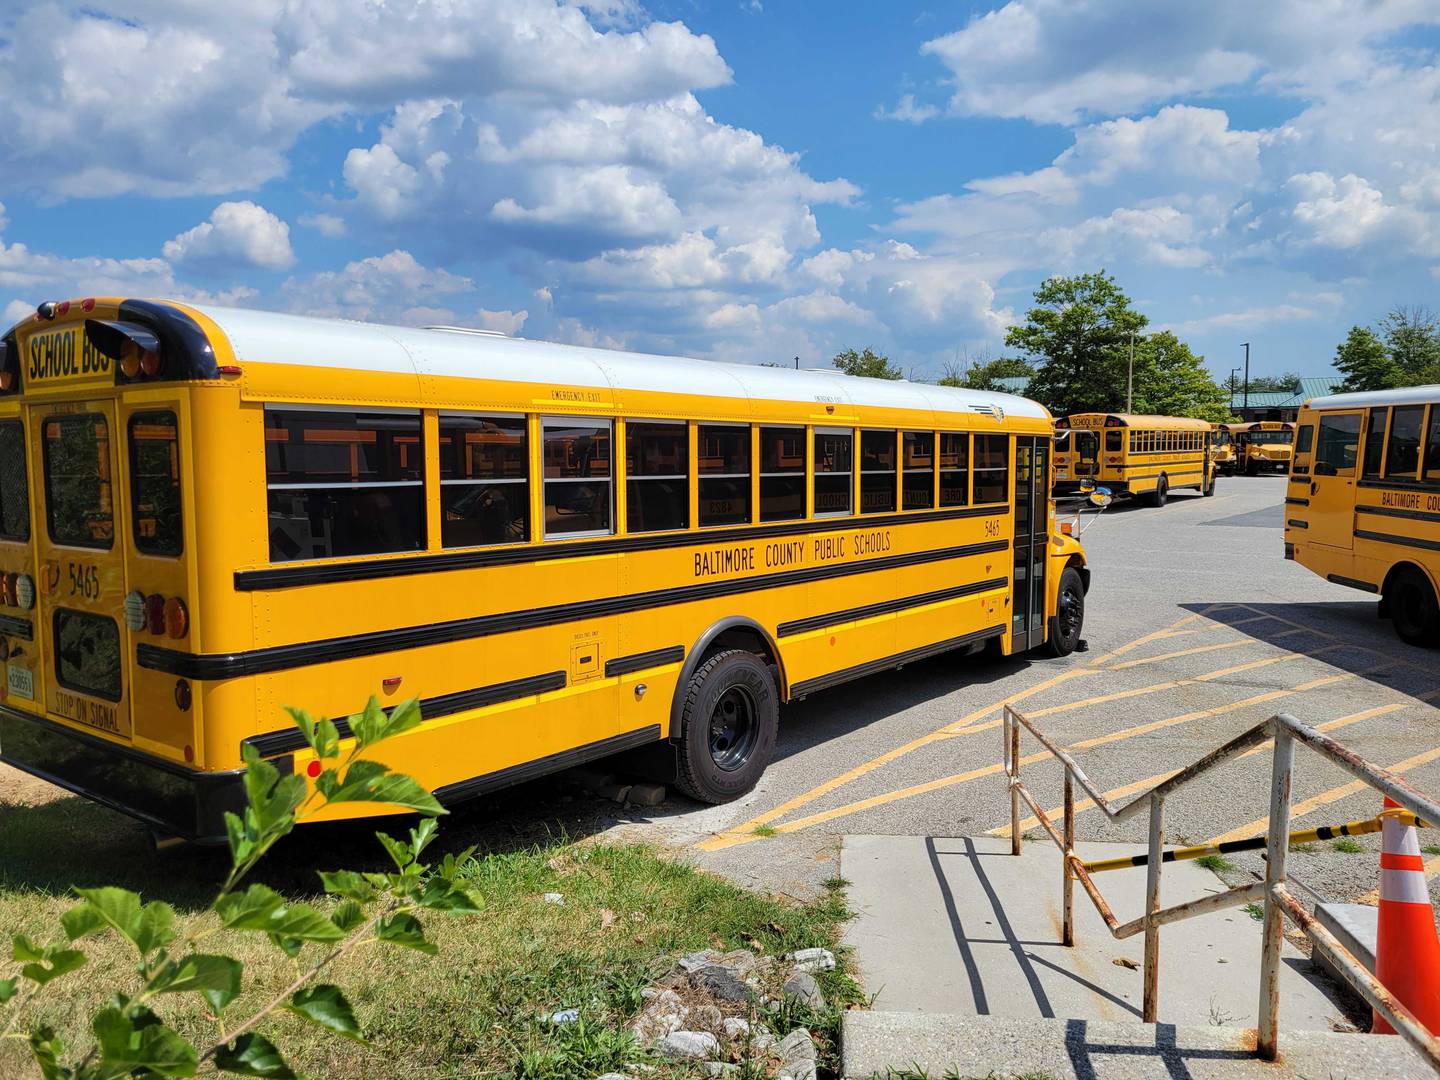 Baltimore Count Public School buses sit in the Northwest bus lot in Milford Mill days before the first day of school.